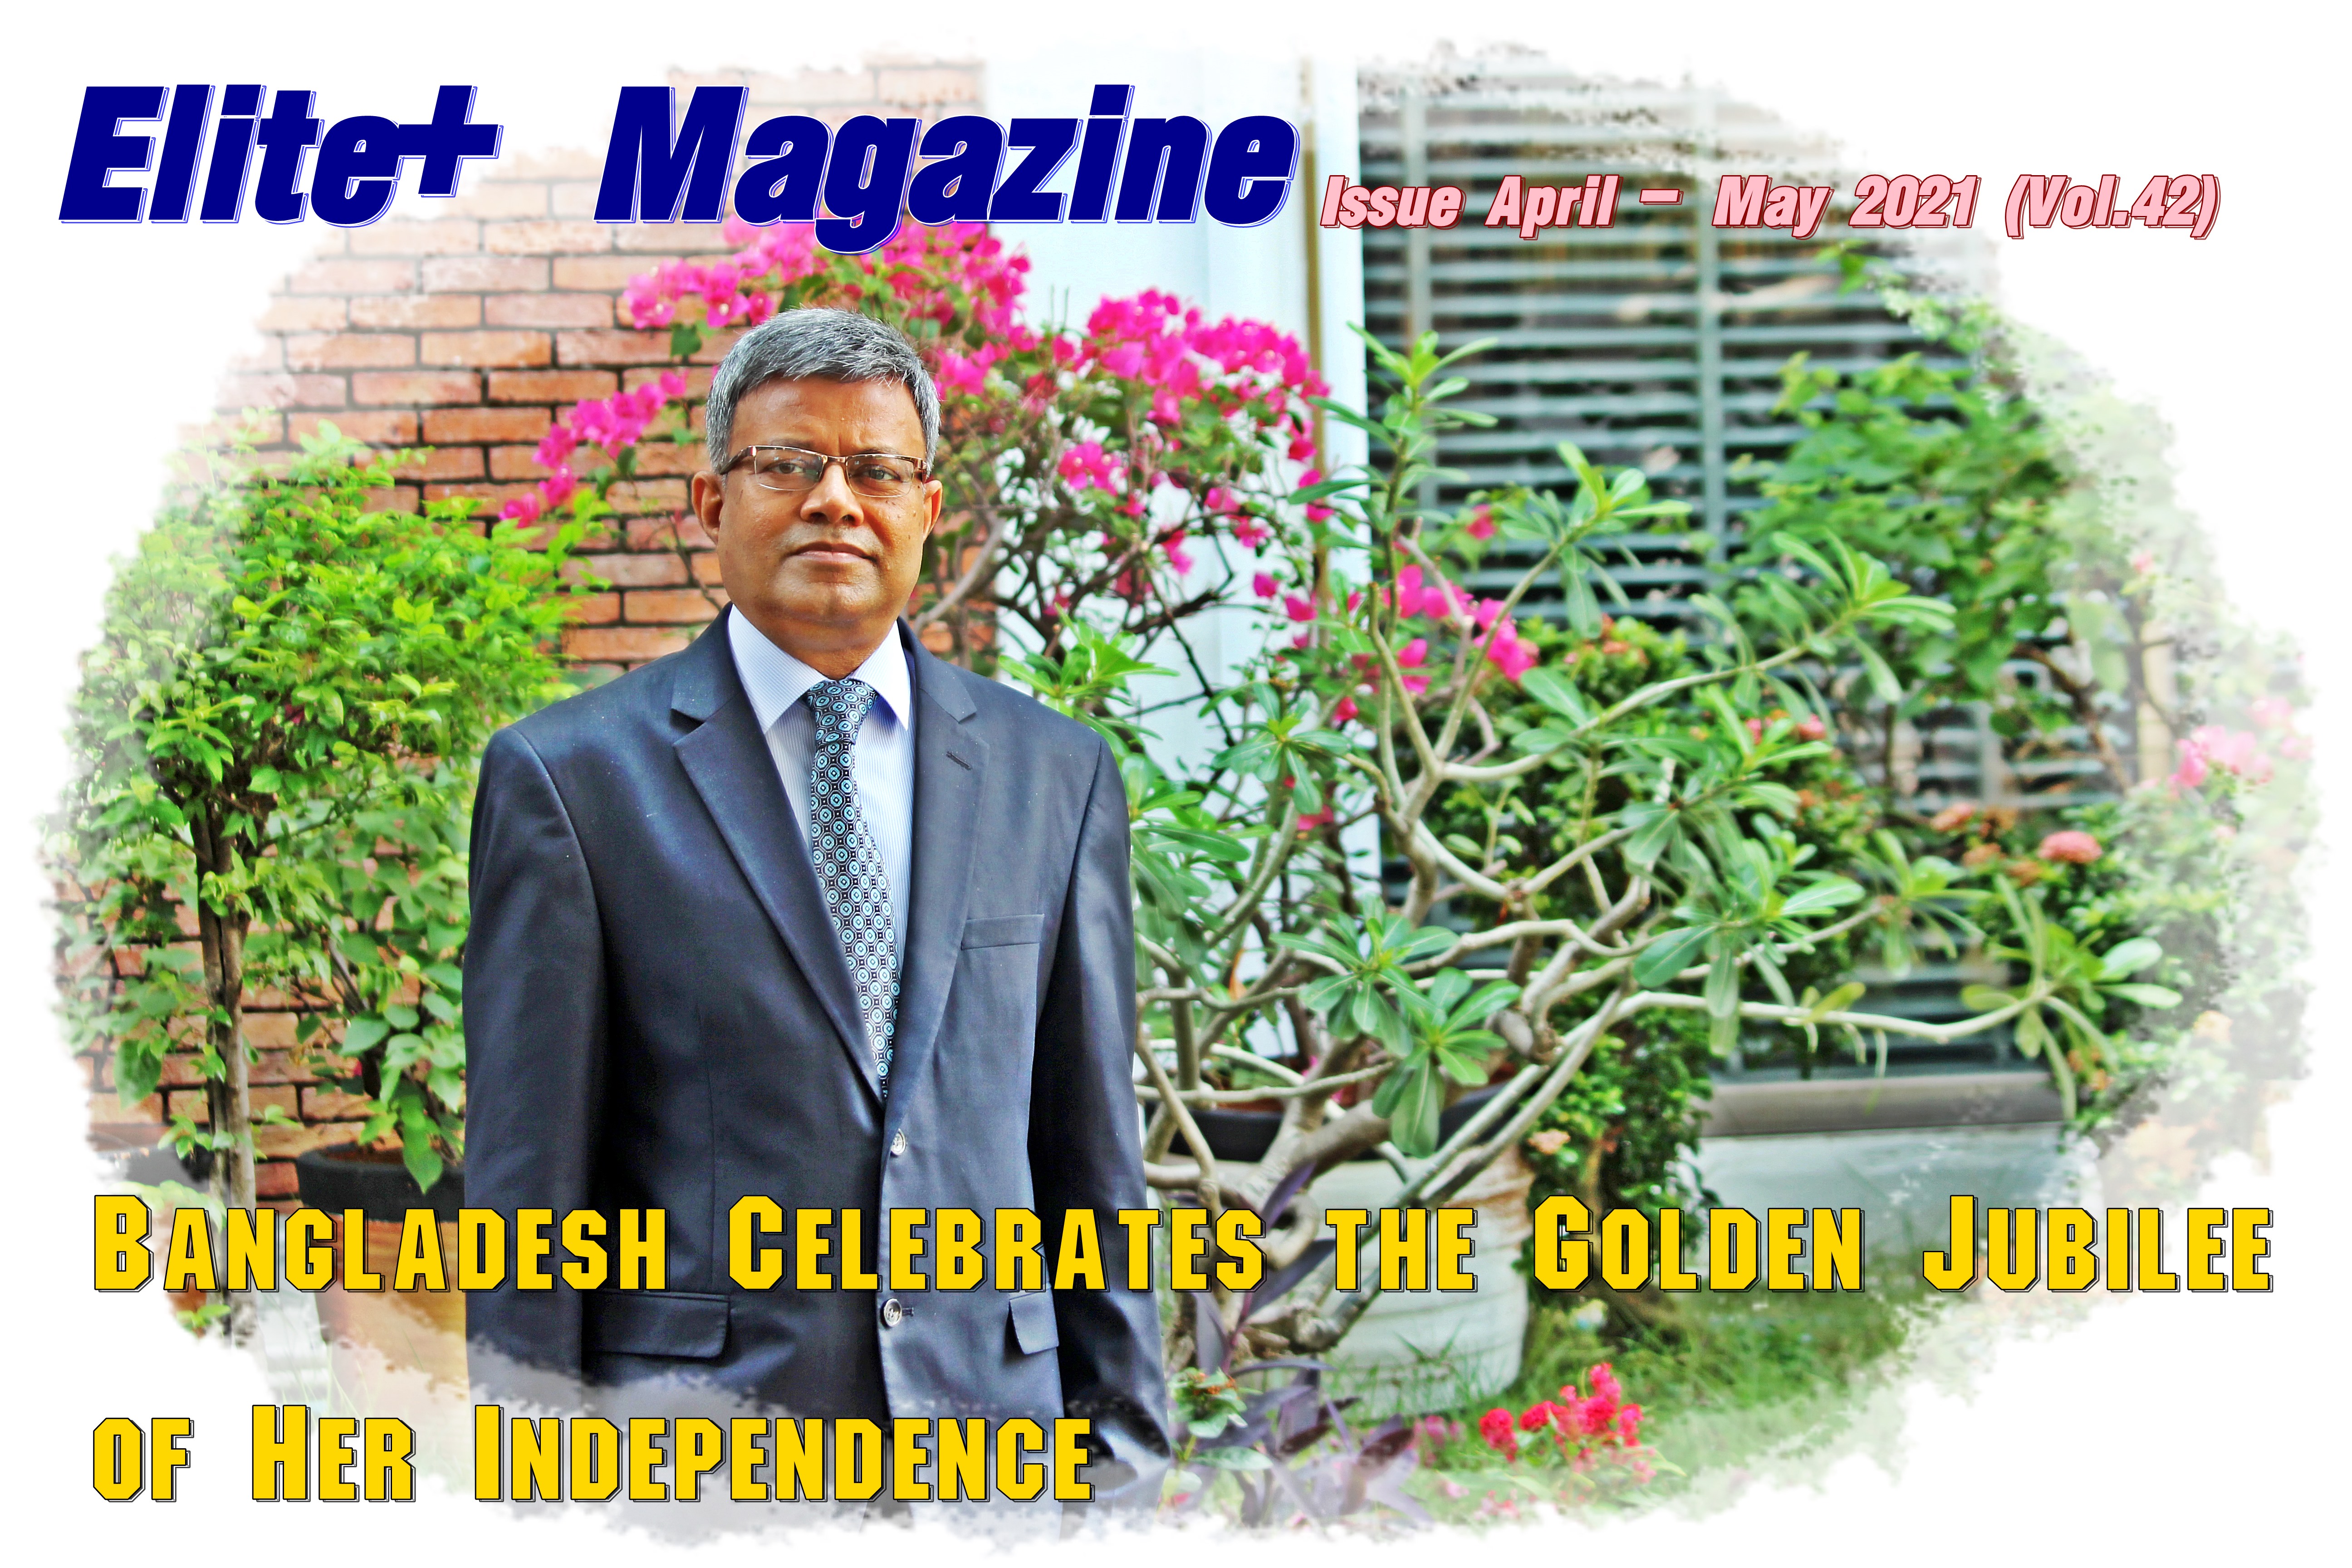 Bangladesh Celebrates the Golden Jubilee of Her Independence